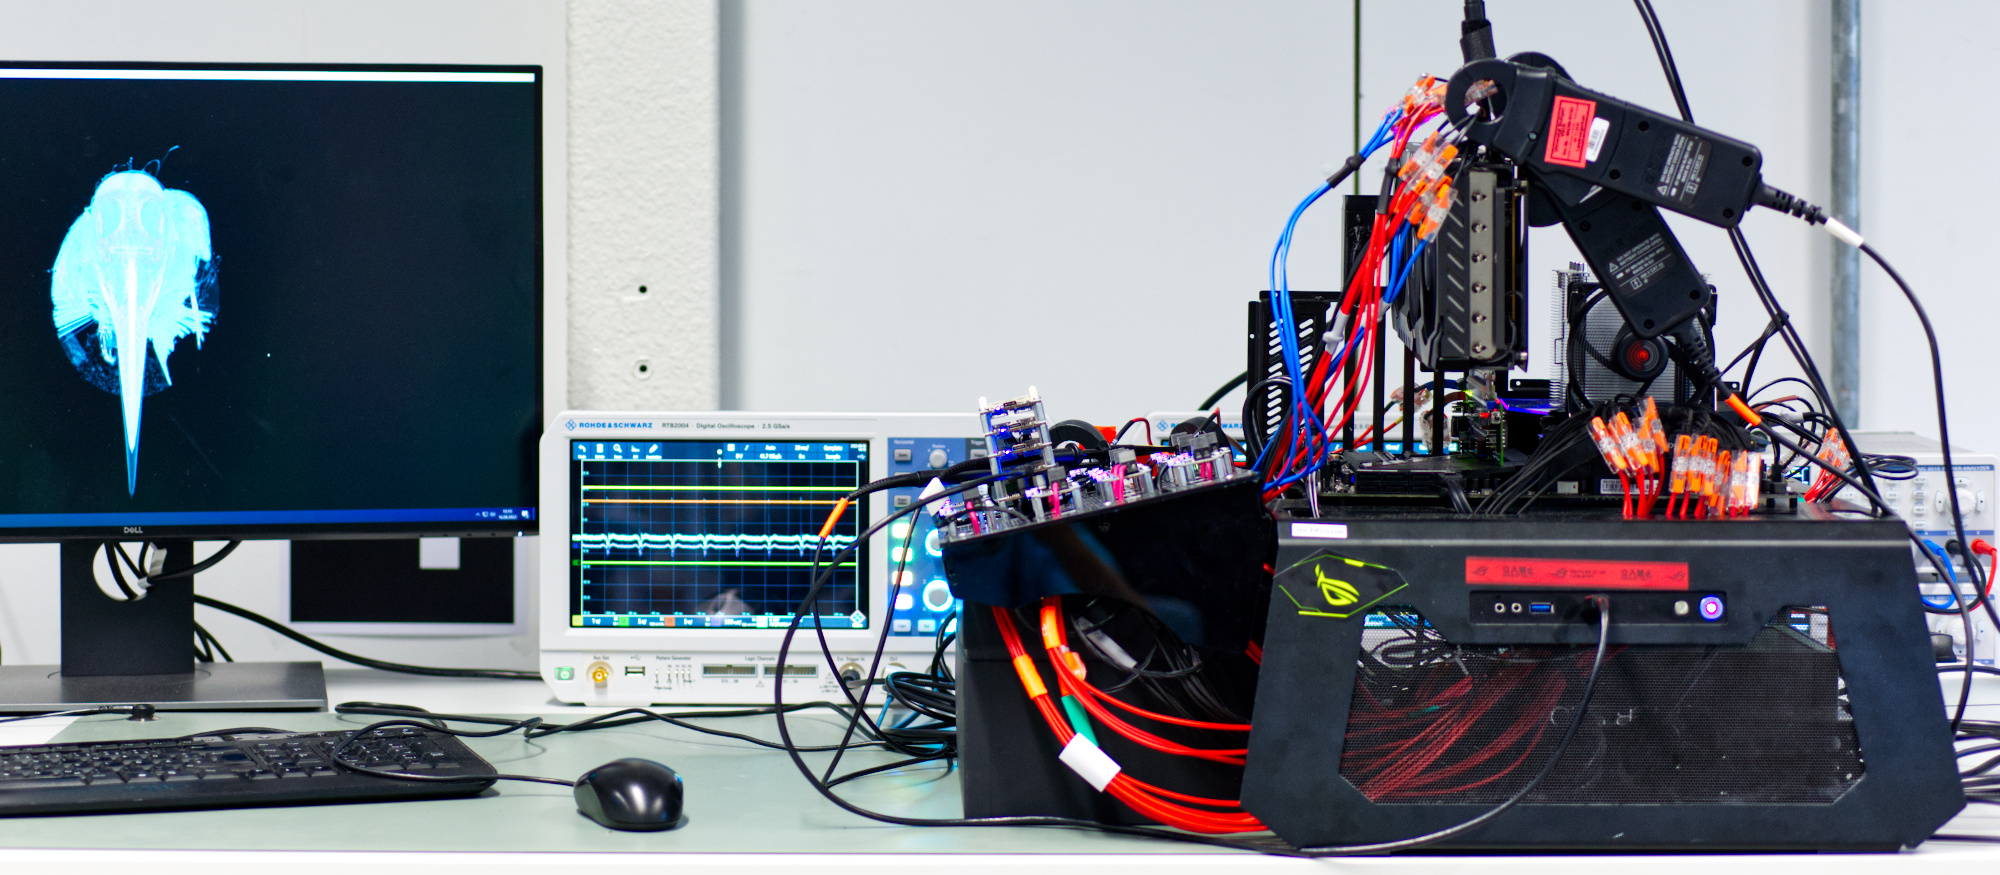 The test bench used in our power measurement experiments: All significant power rails of the system are redirected through microcontroller sensors. Additionally, an external power analyzer and oscilloscopes can be used for additional measurements and verification.